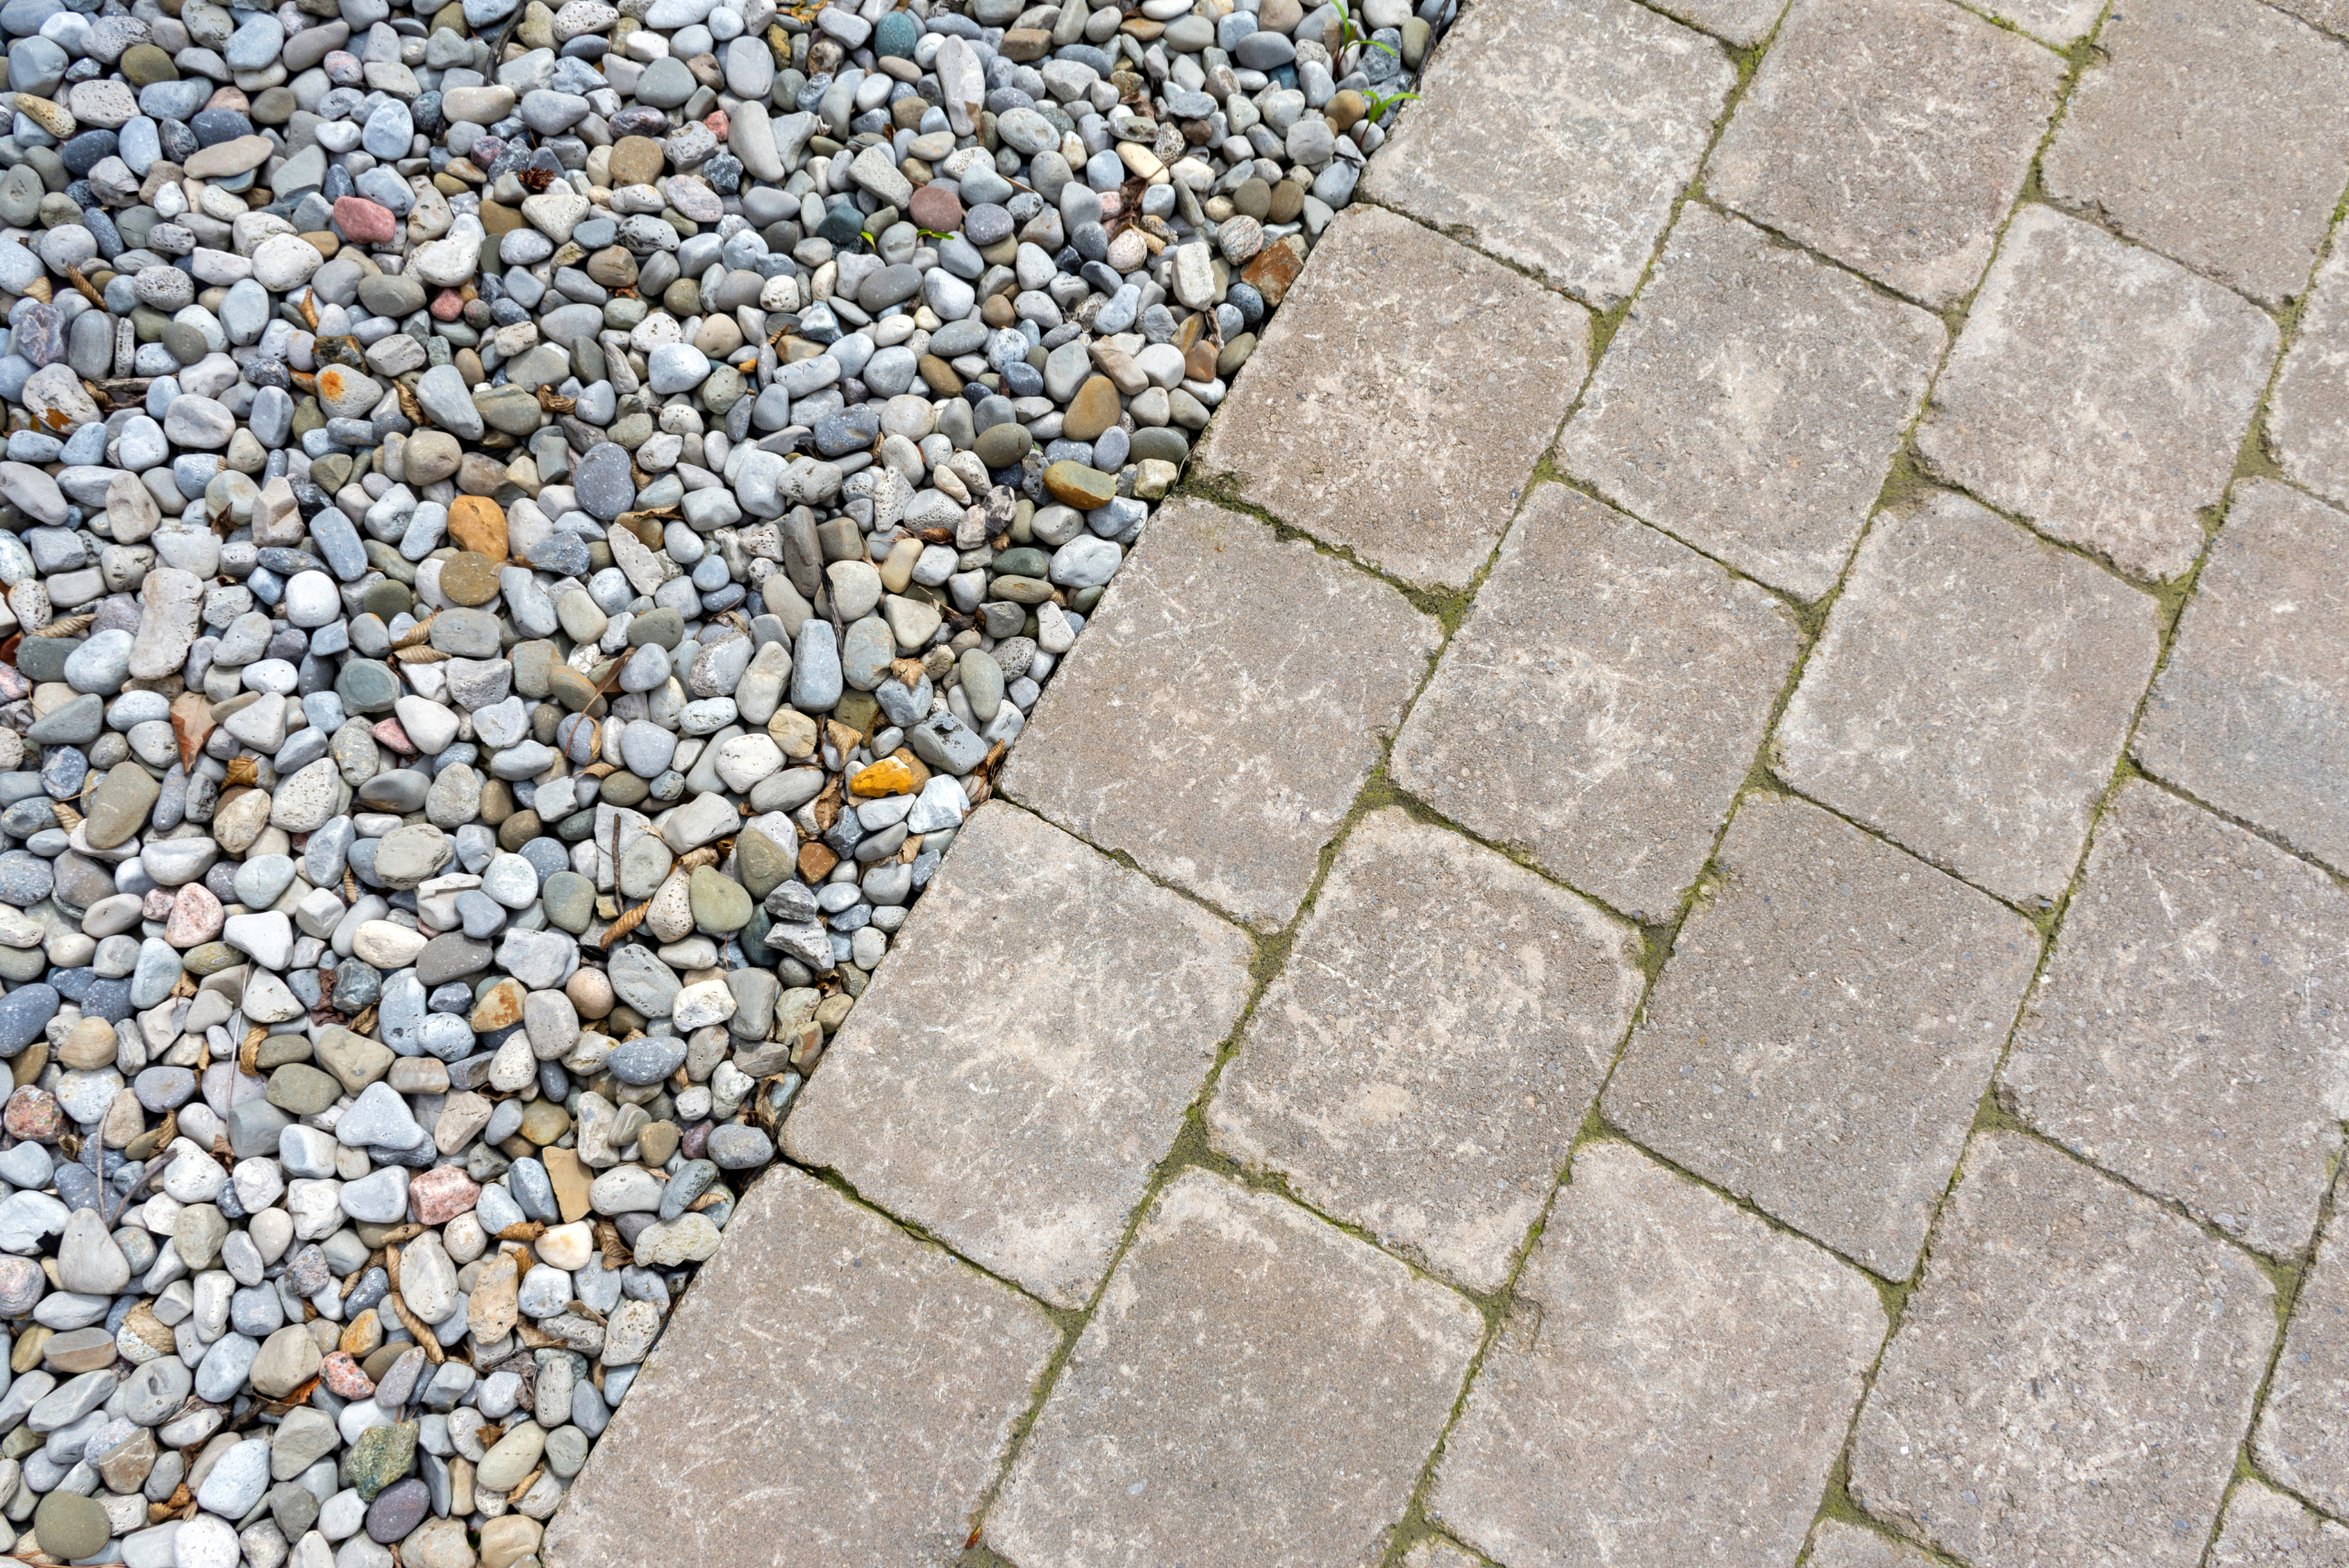 Bricks with pea gravel with clear edge.